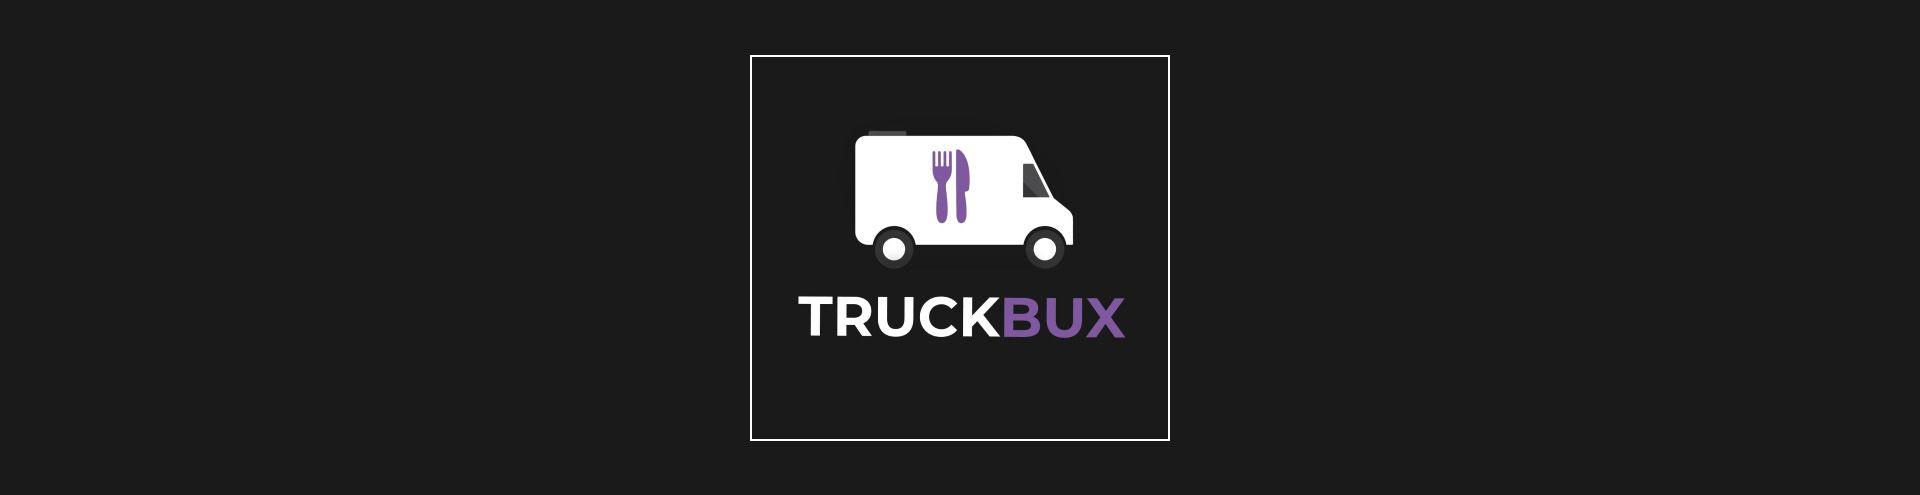 How to Run a Food Truck Delivery App: Interview with Nick Nanakos